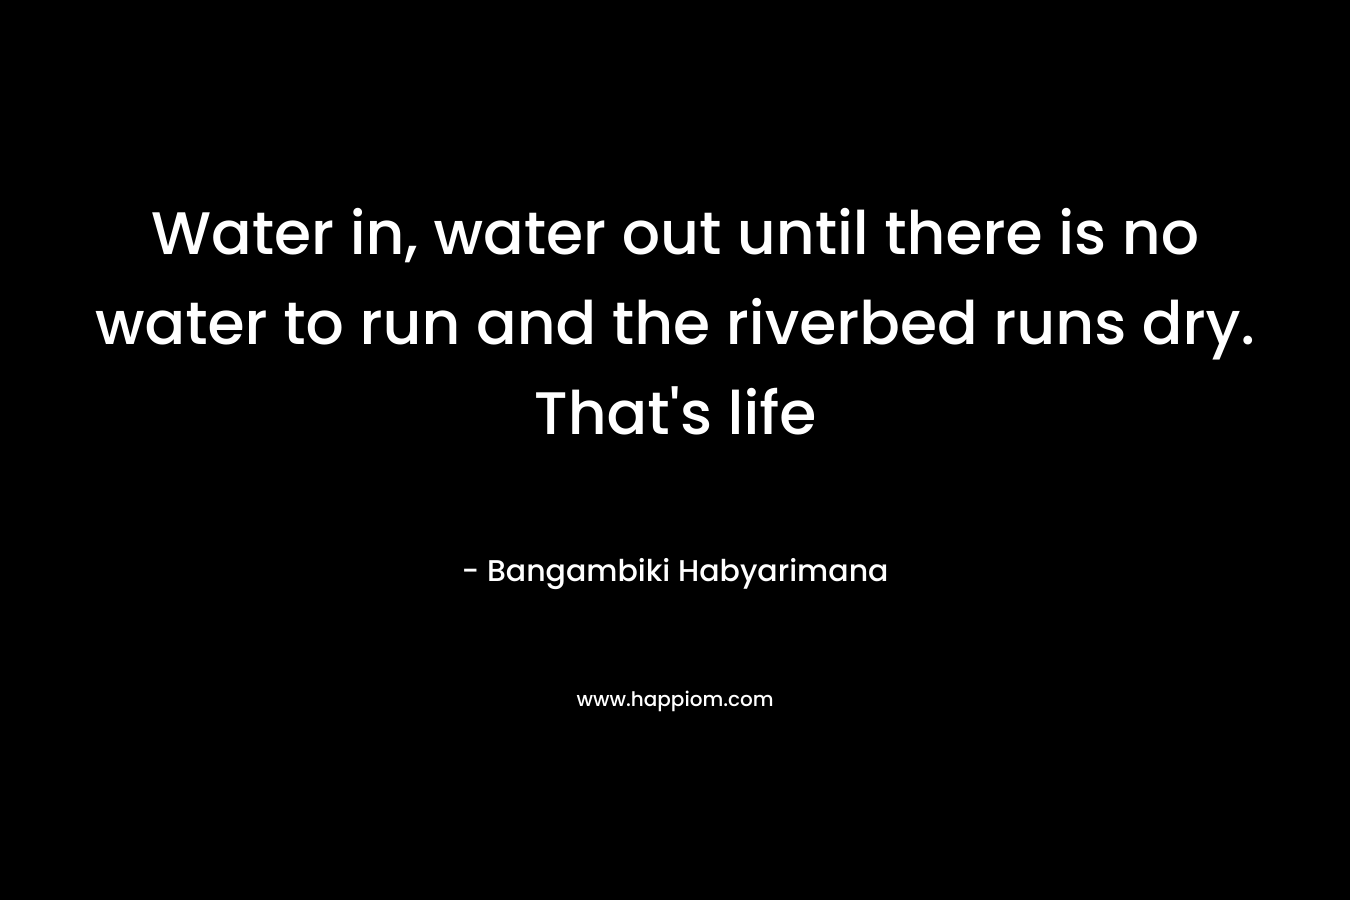 Water in, water out until there is no water to run and the riverbed runs dry. That's life